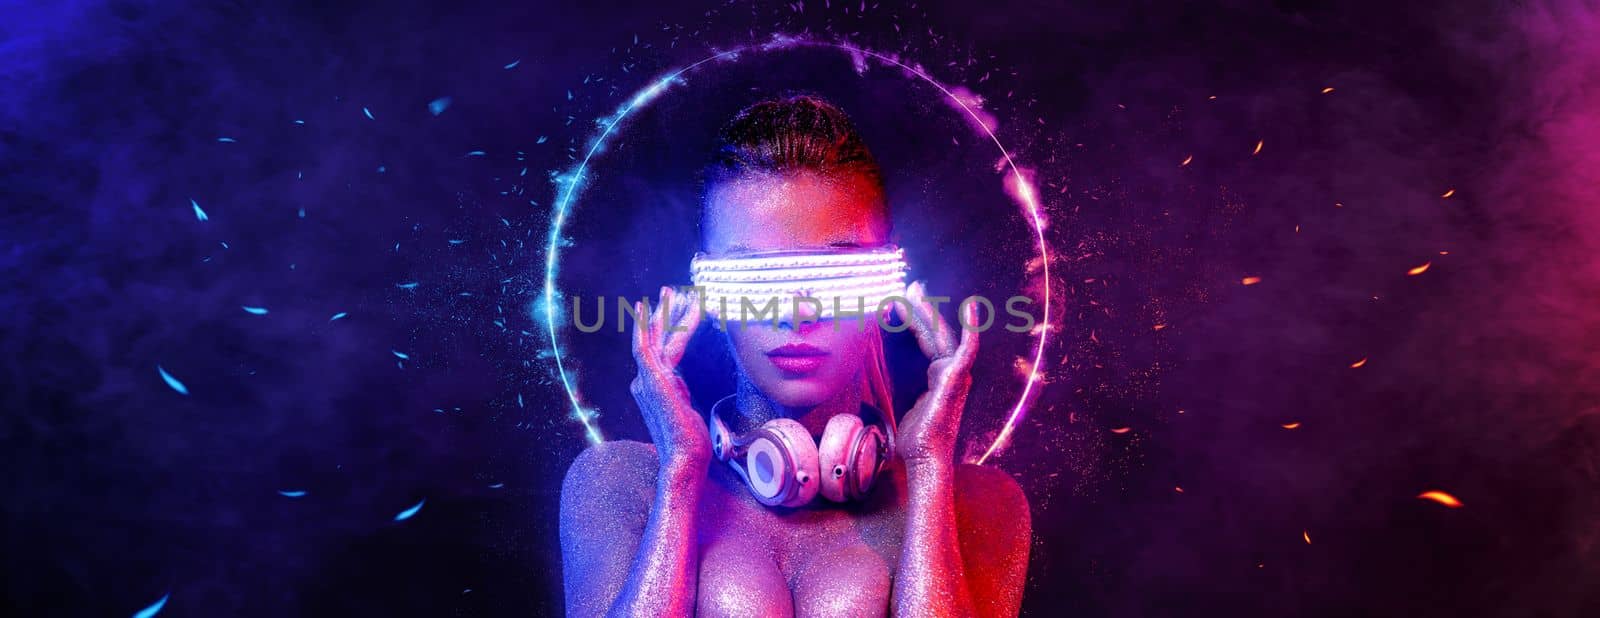 Girl DJ in neon lights with glasses and headphones. Beautyful woman in violet paint on her face and body. Portrait of sexy TDJ at club party